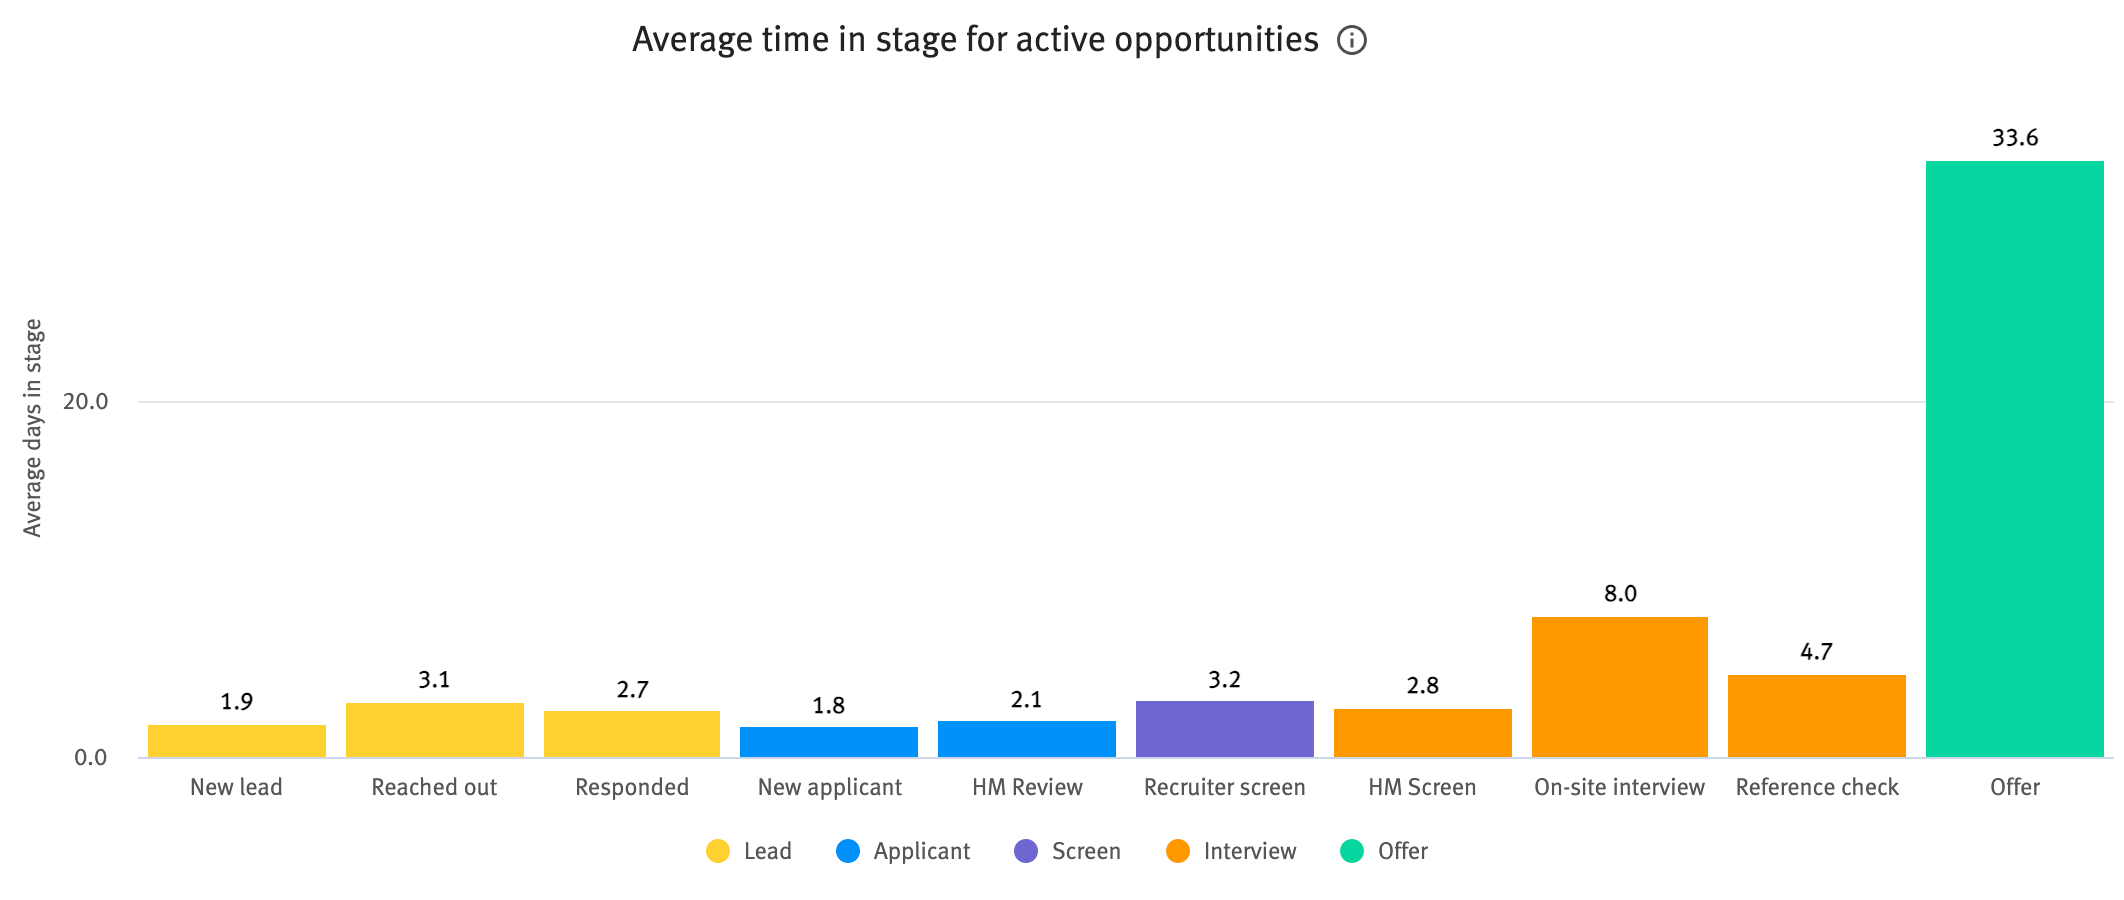 Average time in stage for active opportunities